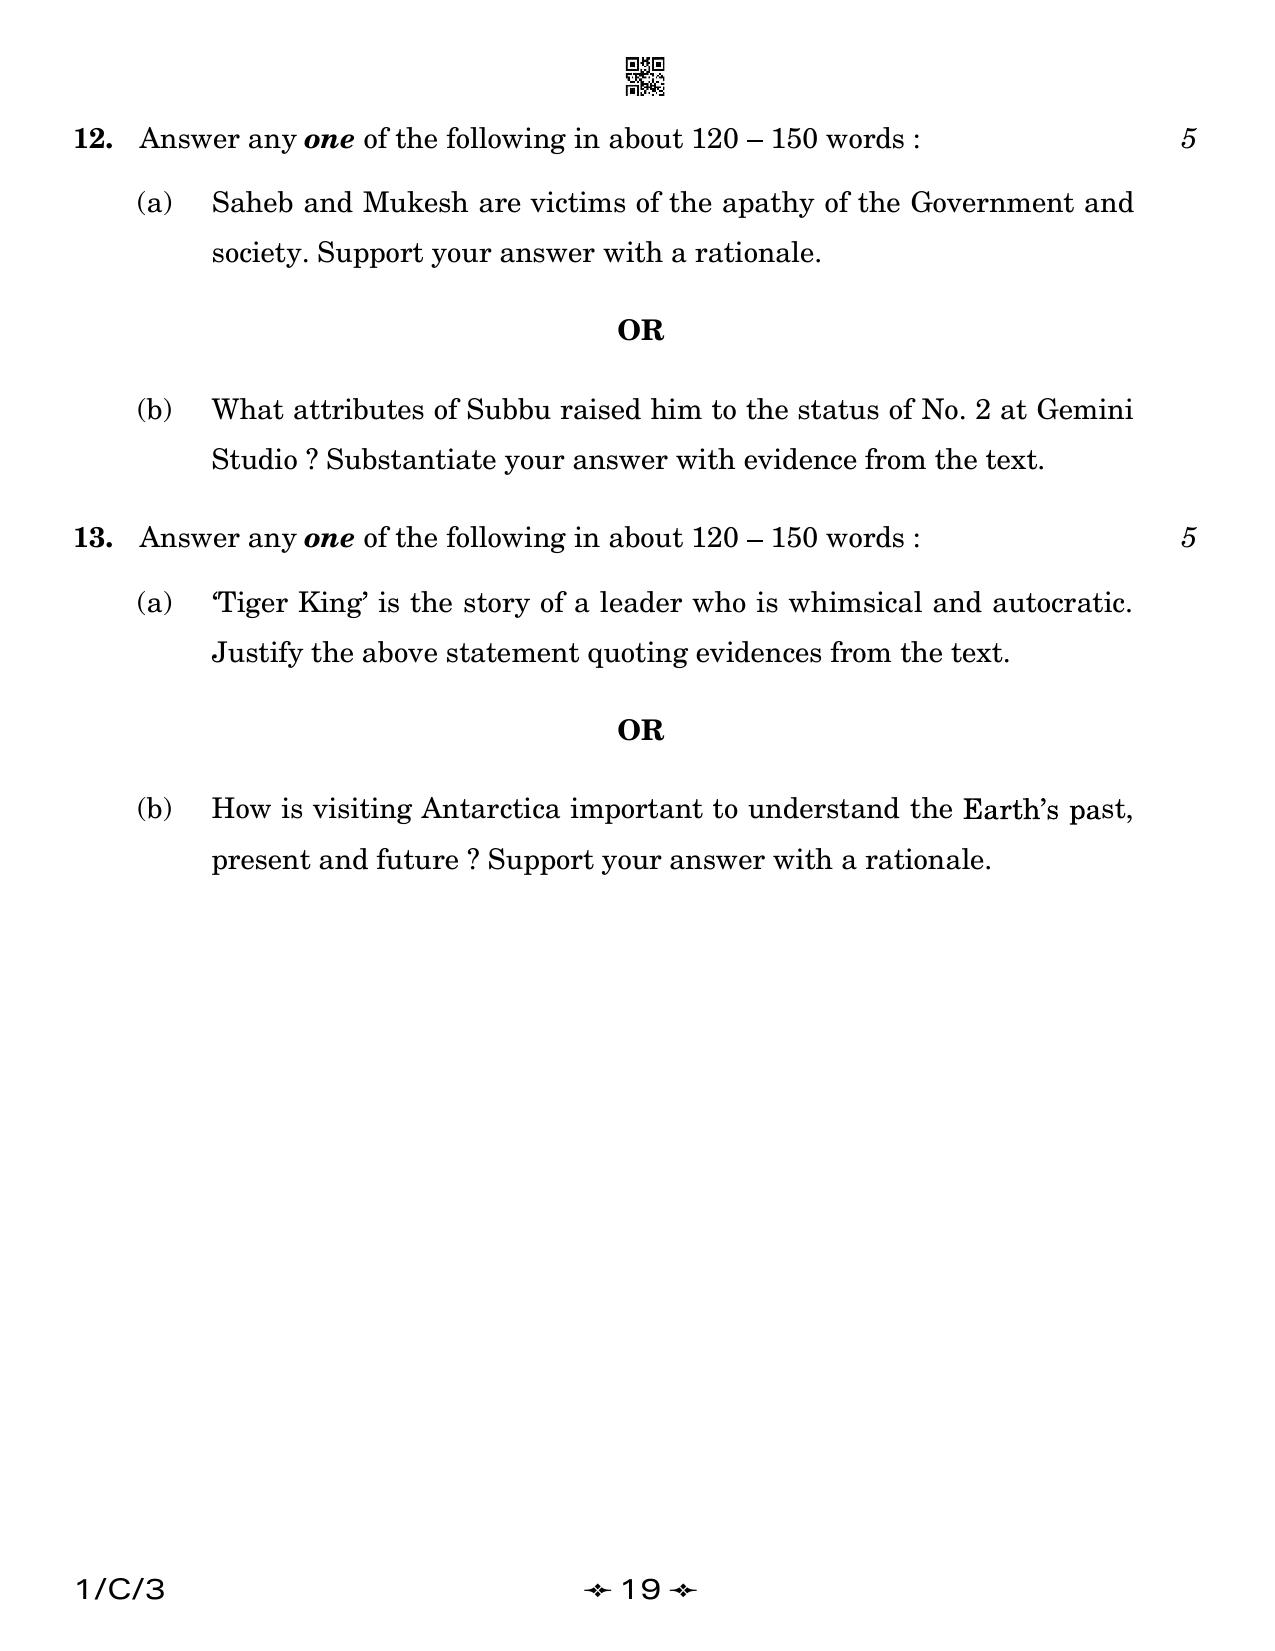 CBSE Class 12 1-3 English Core 2023 (Compartment) Question Paper - Page 19